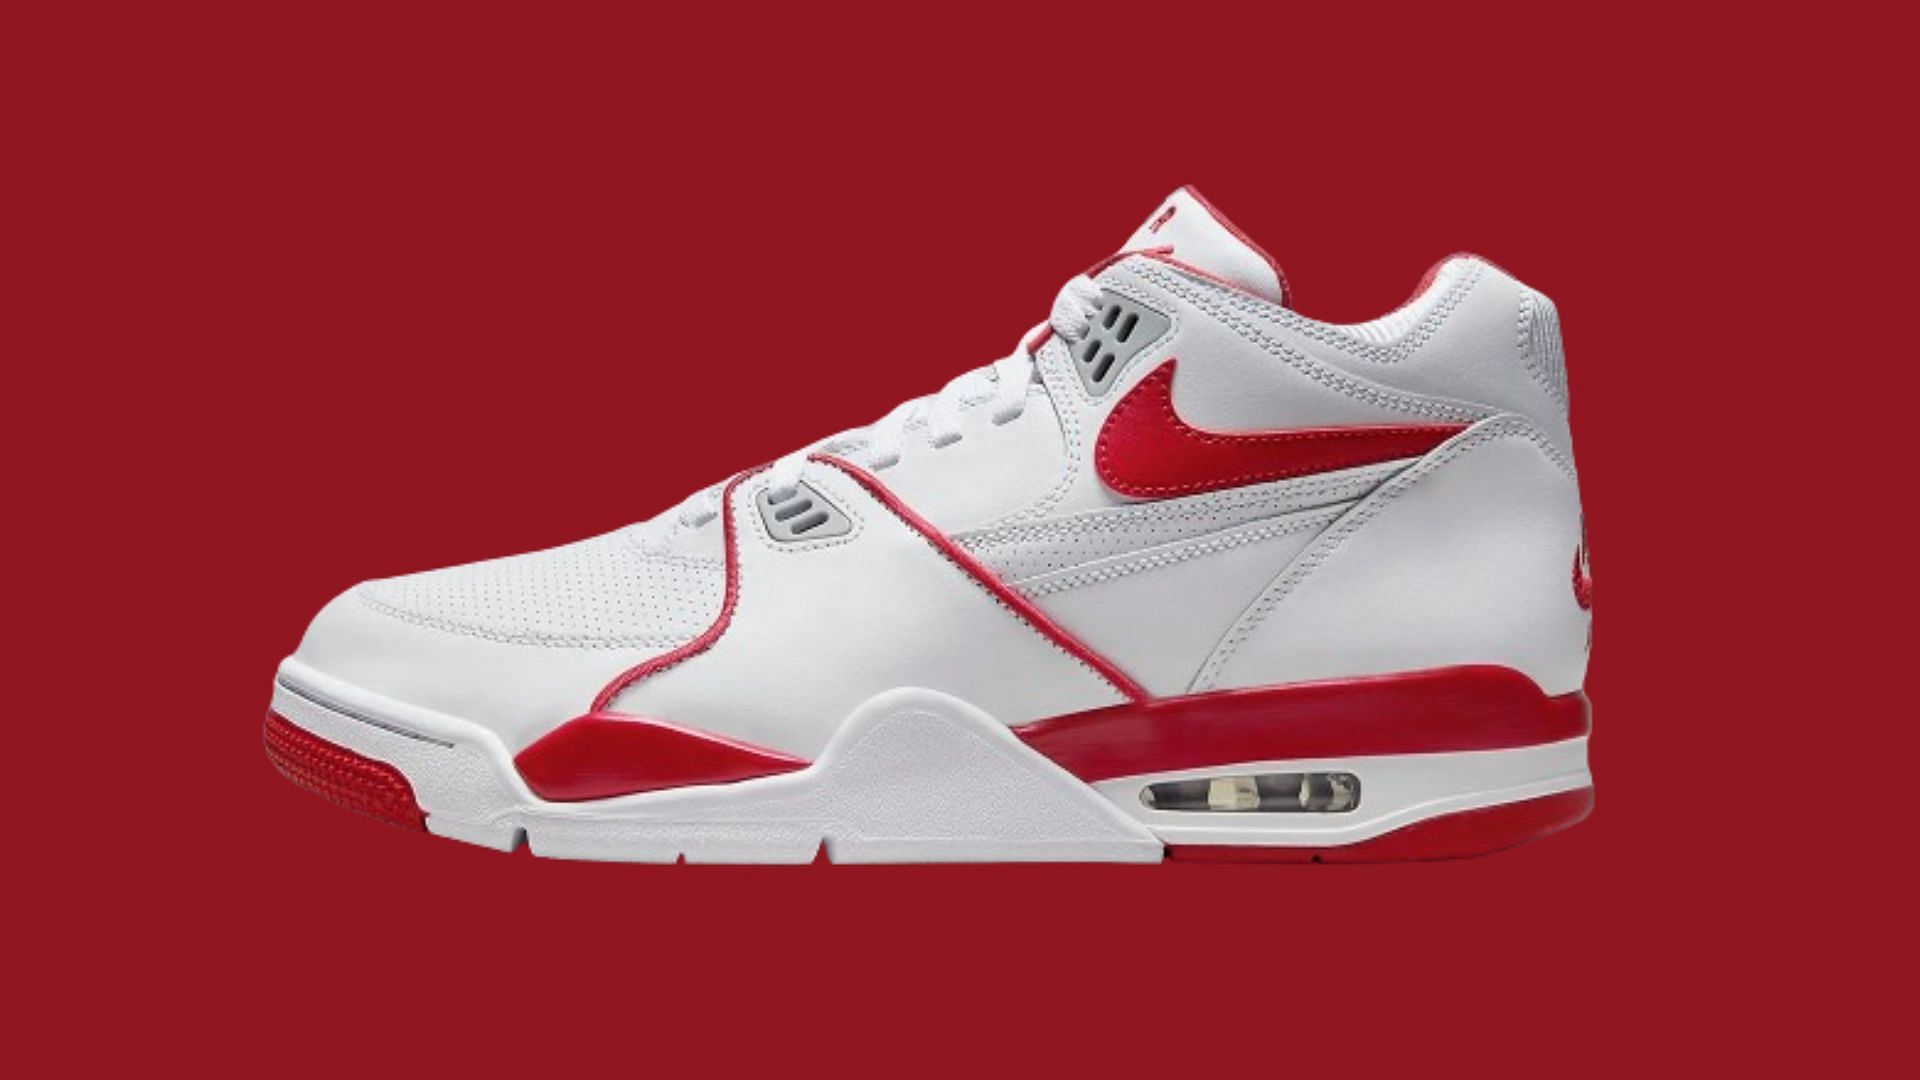 The Nike Air Flight '89 “Fire Red” sneakers: Everything we know so far